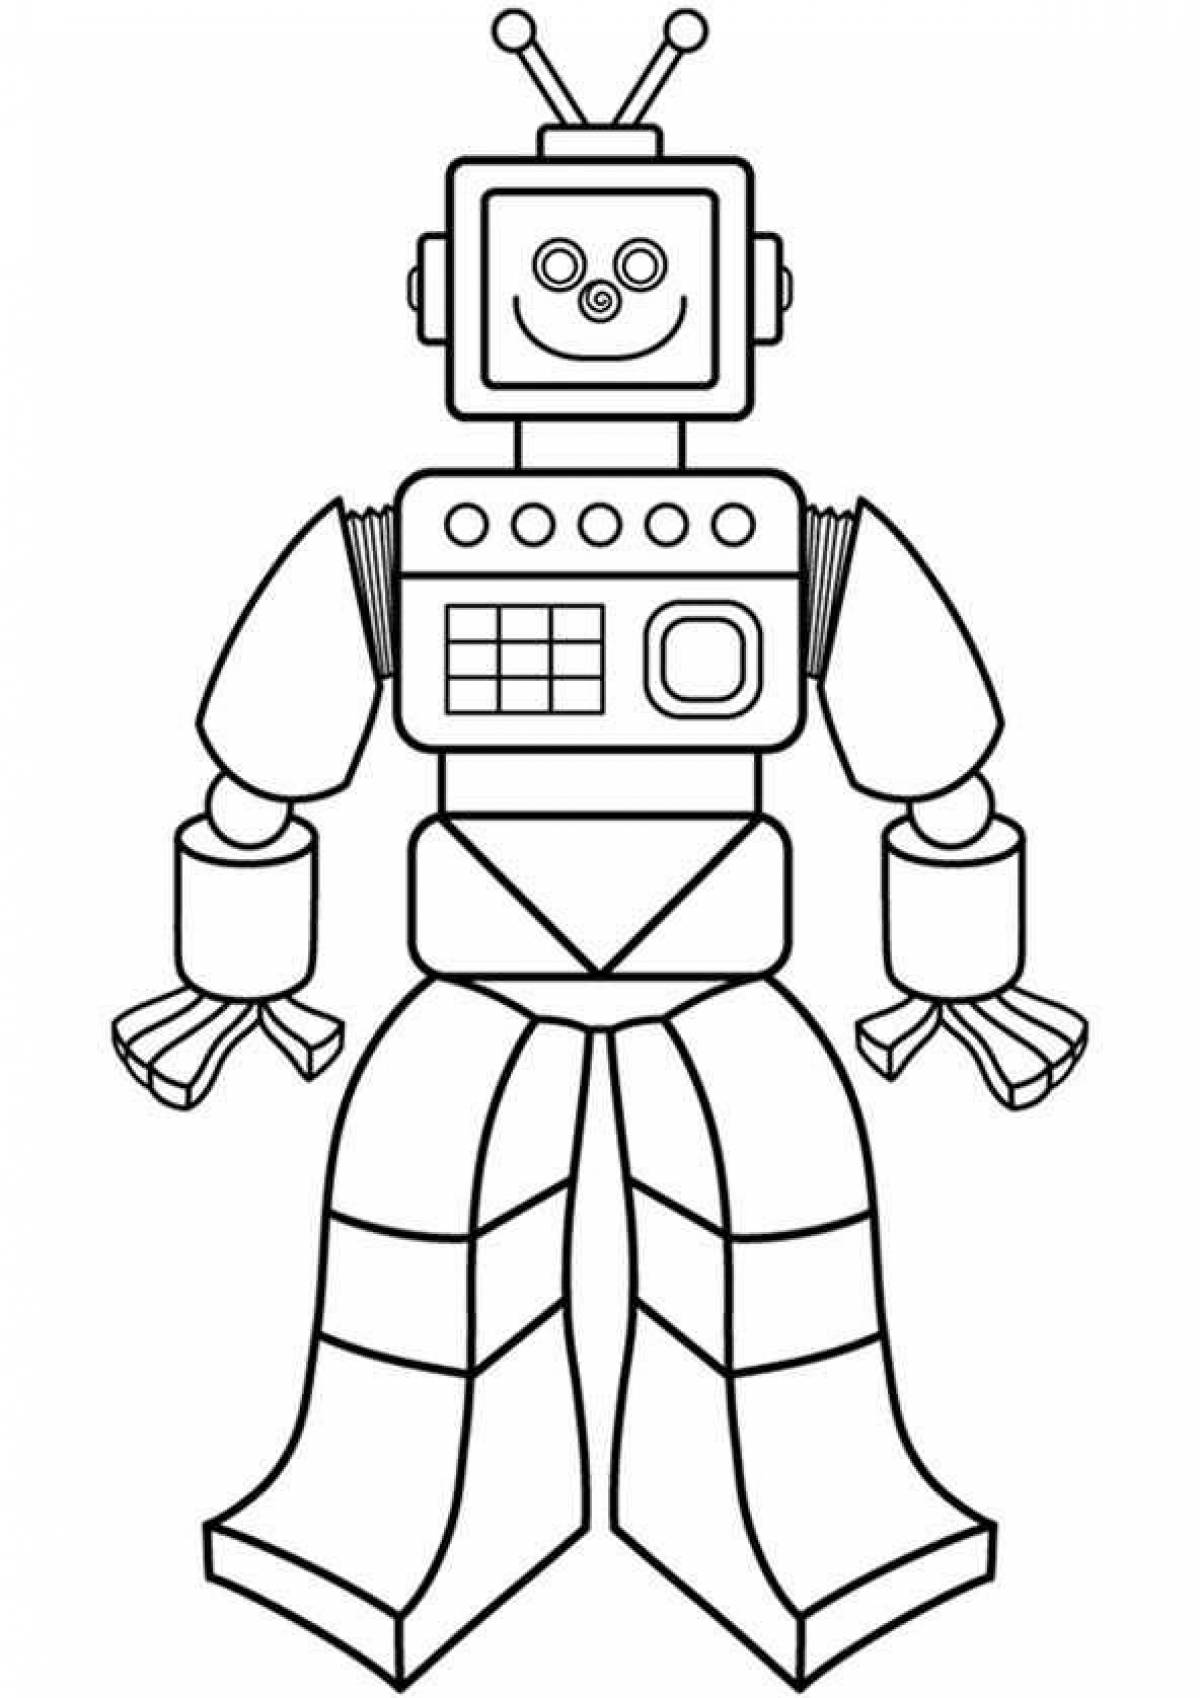 Coloring robots for 3-4 year olds